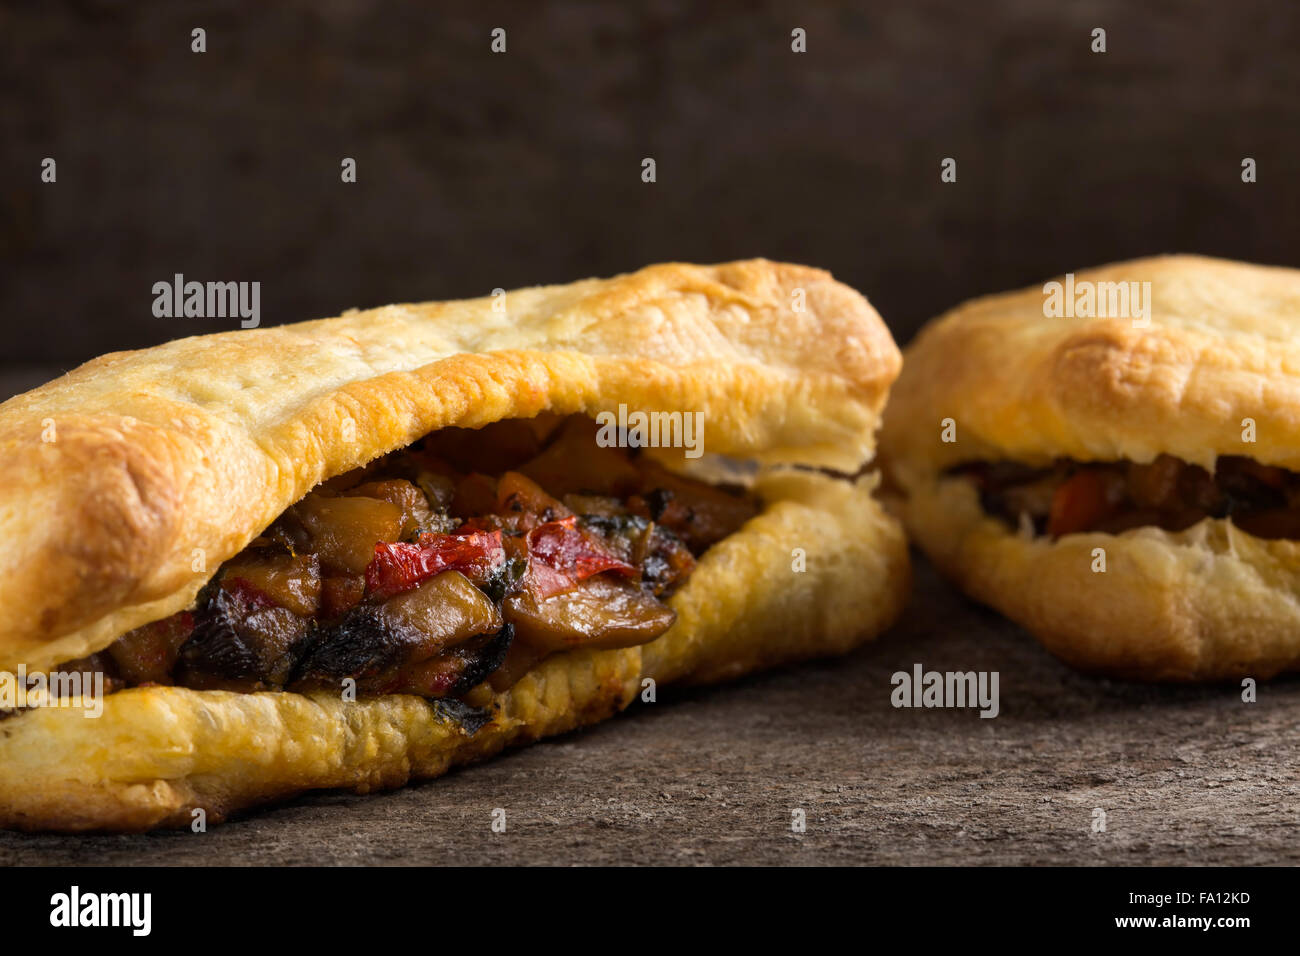 Puff pastry stuffed with mushrooms and vegetables Stock Photo